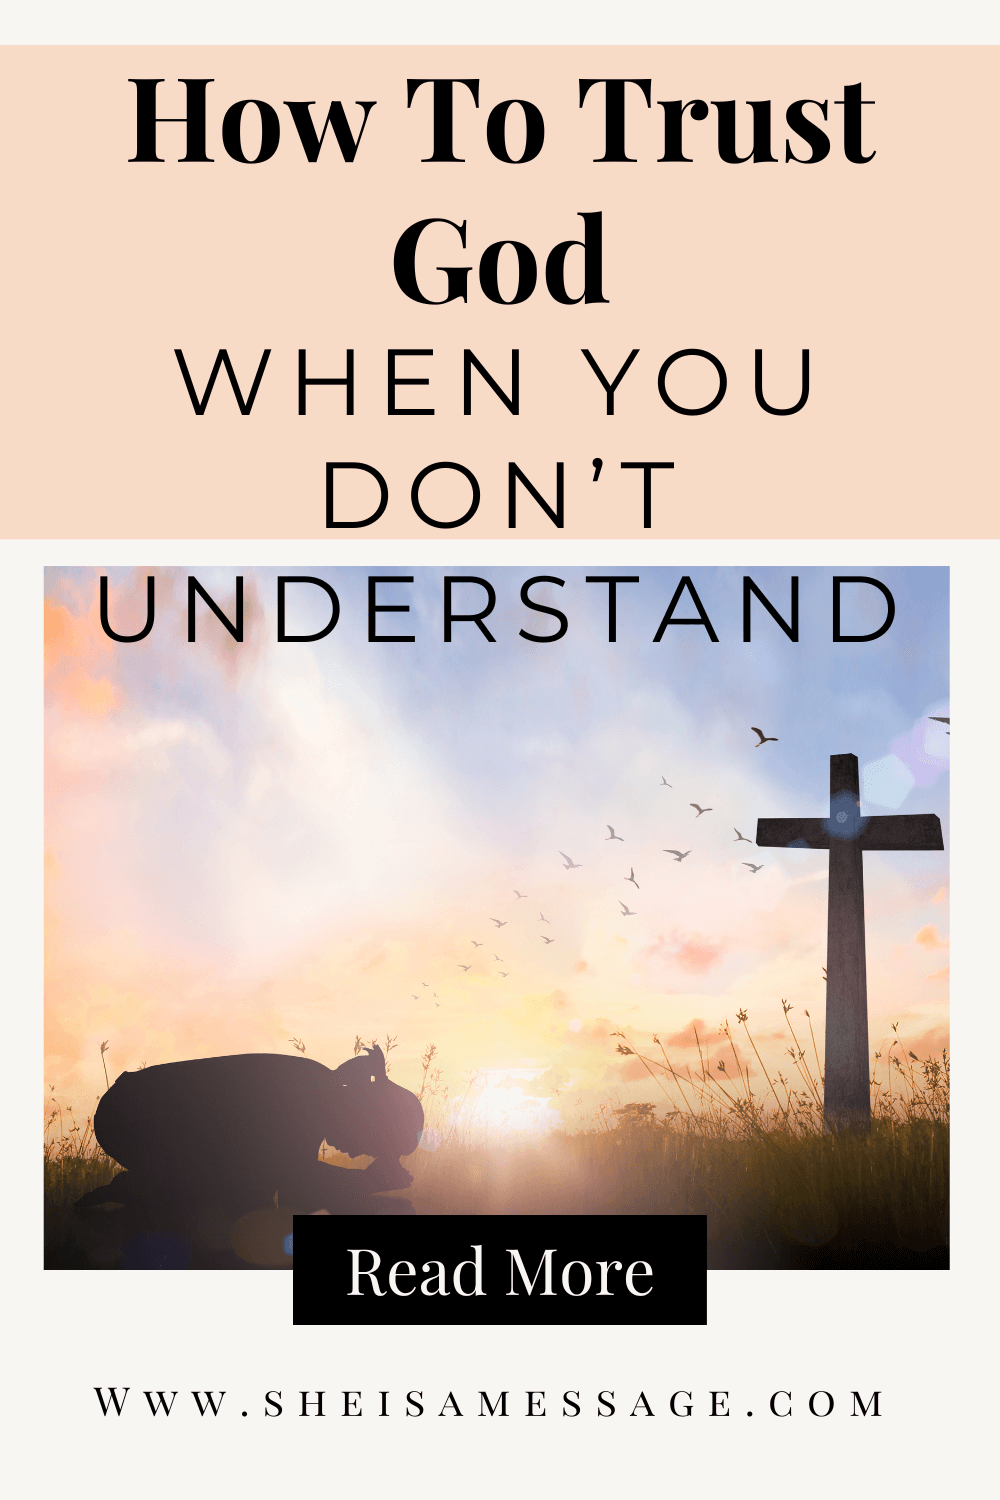 Trusting In God When You Don't Understand Pin 1